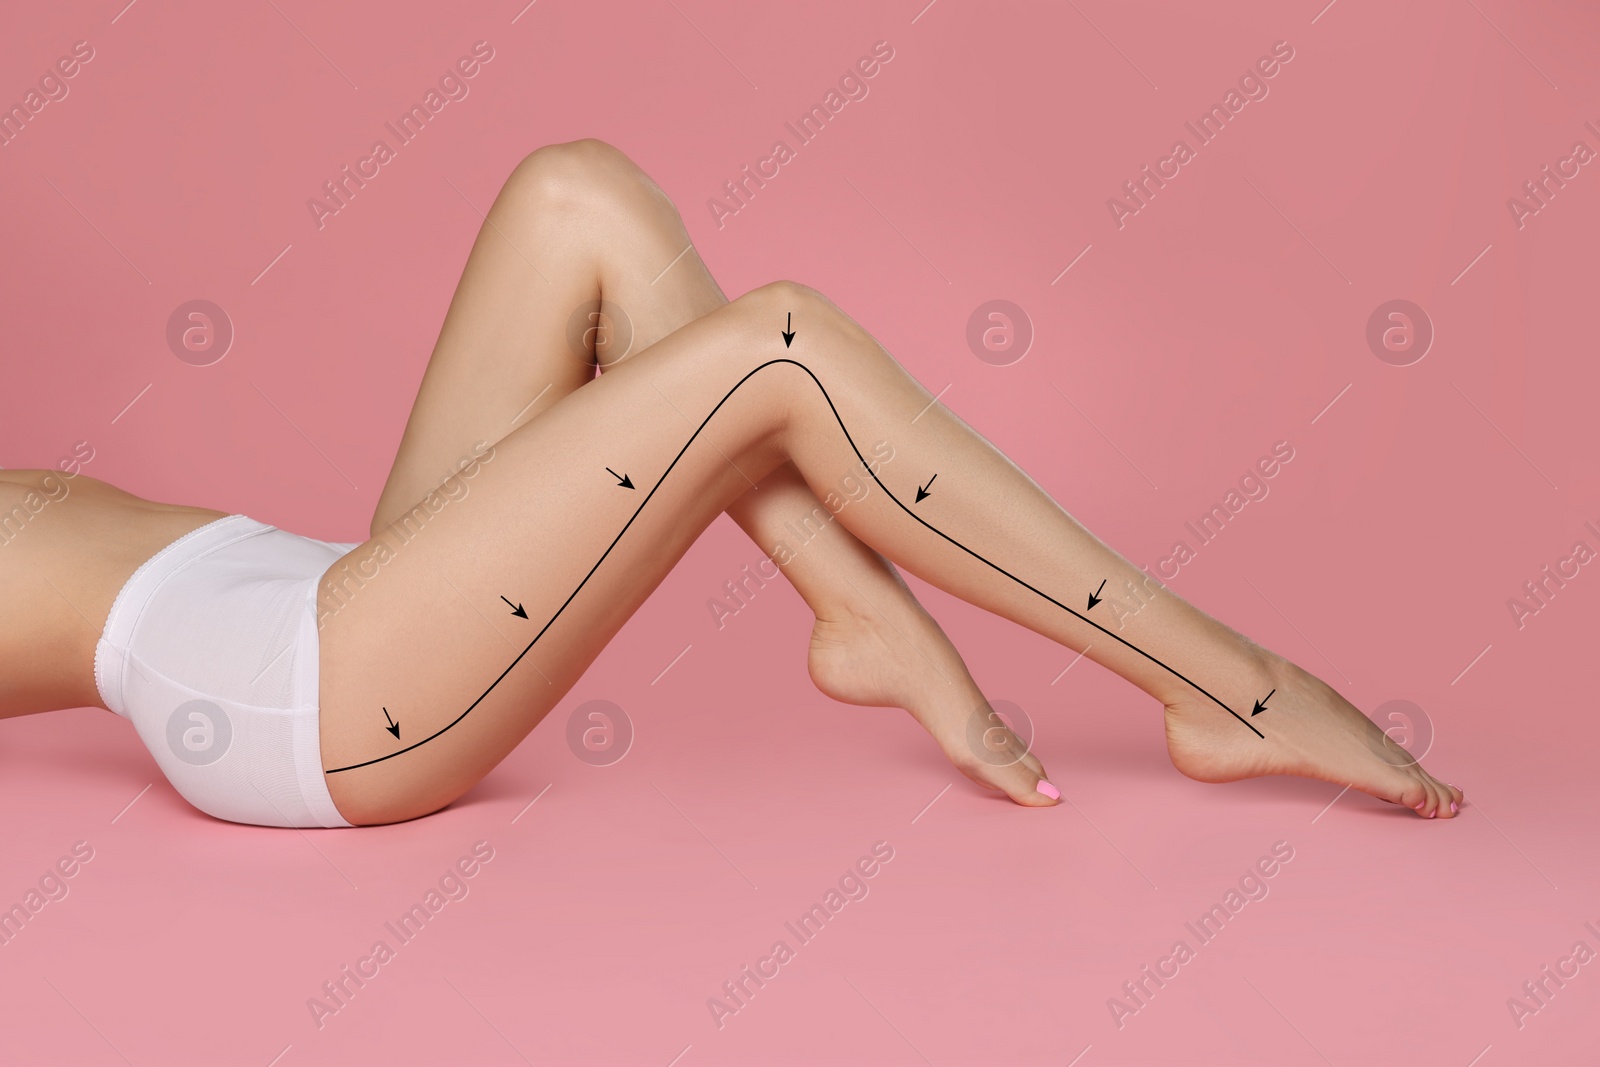 Image of Epilation guide - how to remove hair in proper direction. Woman with drawn lines and arrows on her beautiful smooth legs against pink background